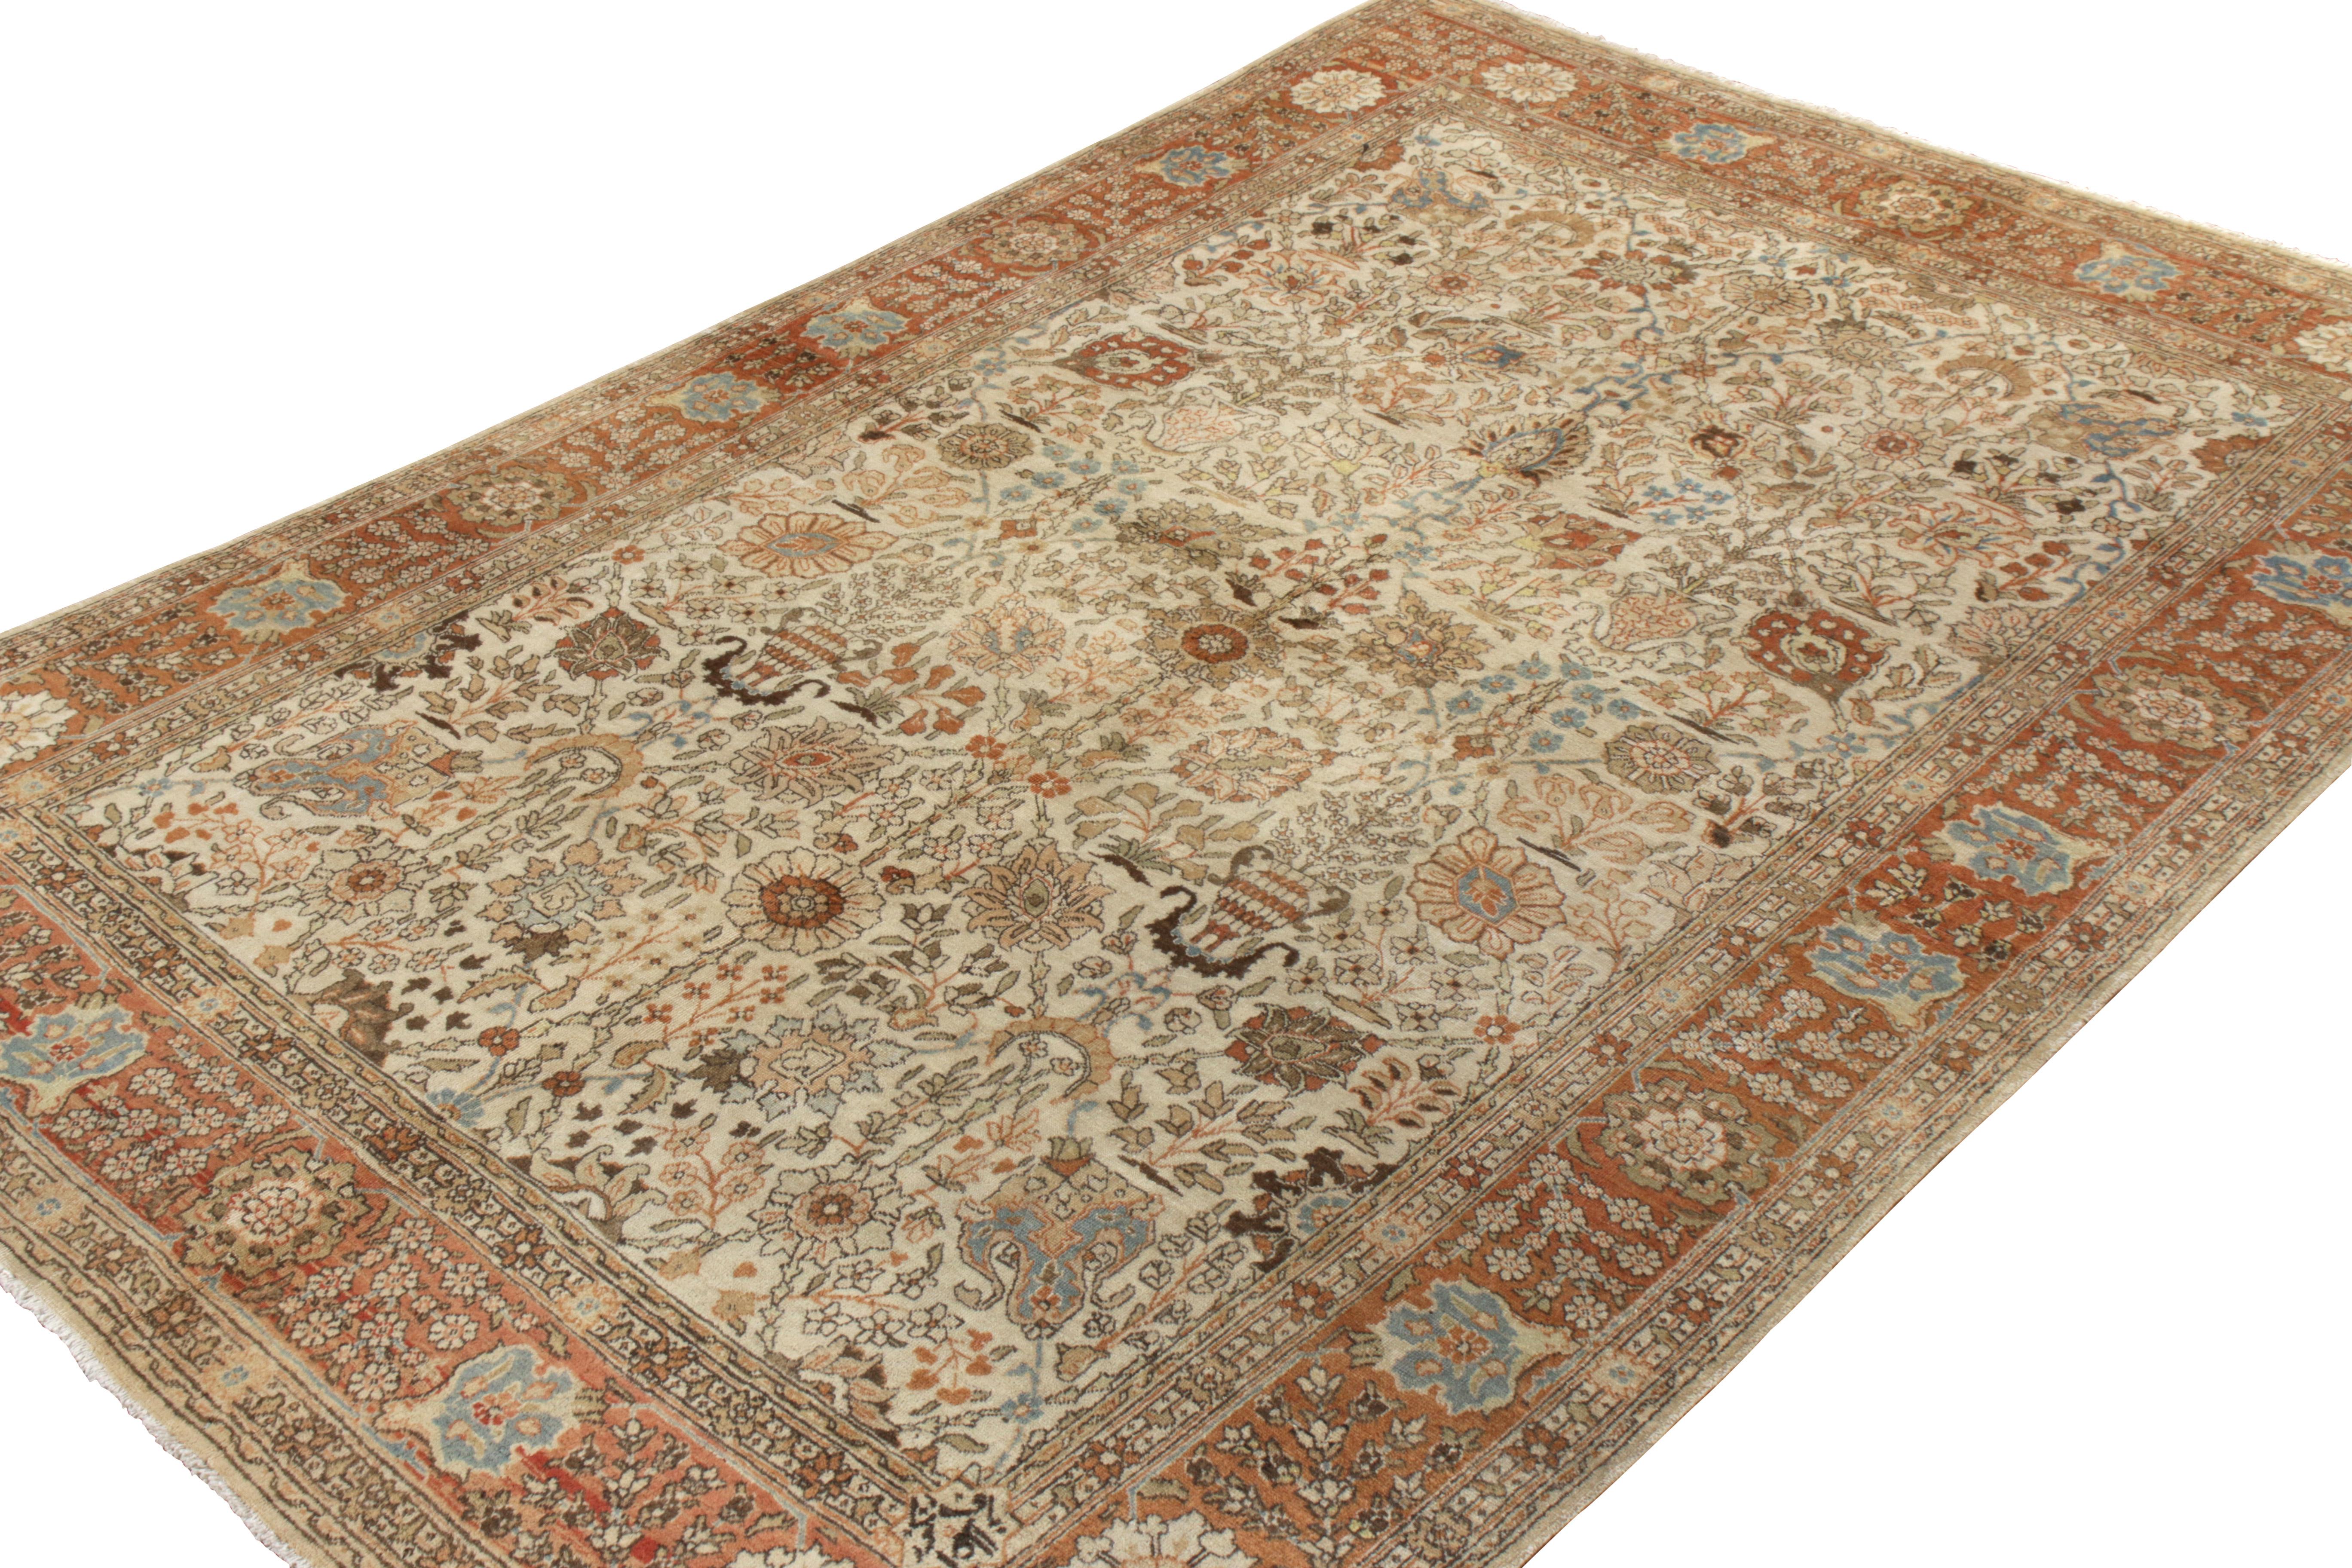 Tabriz Antique Persian Rug in All over Orange OffWhite, Floral Pattern by Rug & Kilim For Sale